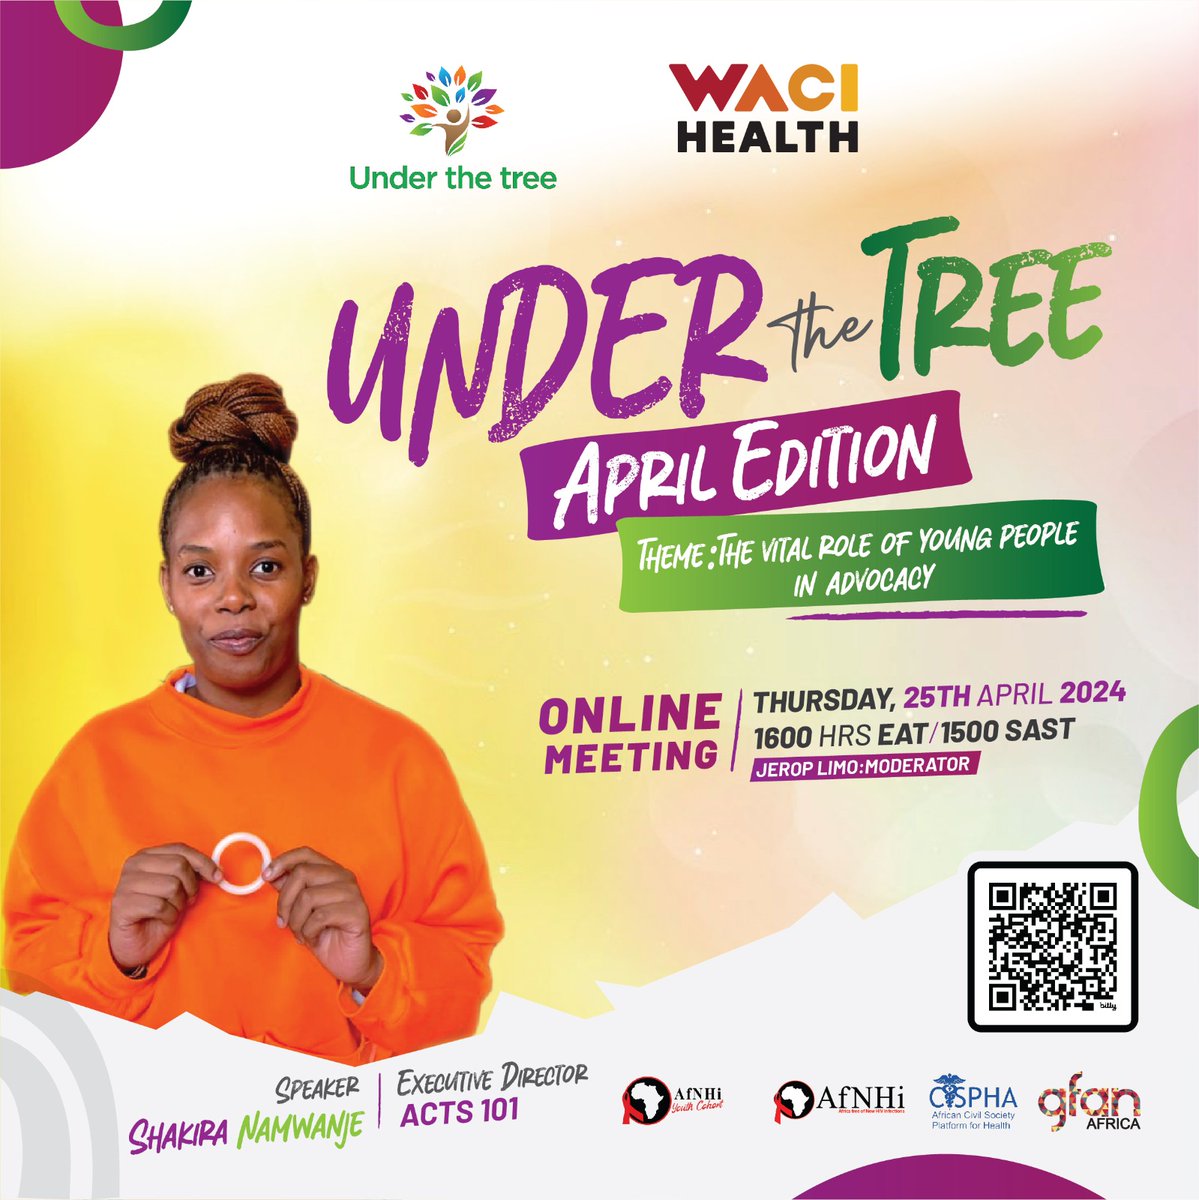 Are you ready🥳🥳🥳 join us tomorrow, Thursday 25th April at 4pm EAT as our Team lead @KeiraShakie speaks in the April Edition of Under The Tree with @UnderTheTree @WACIHealth @AfNHi_Tweets @apha_sa In a conversation themed ; The Vital Role of Young People in advocacy.